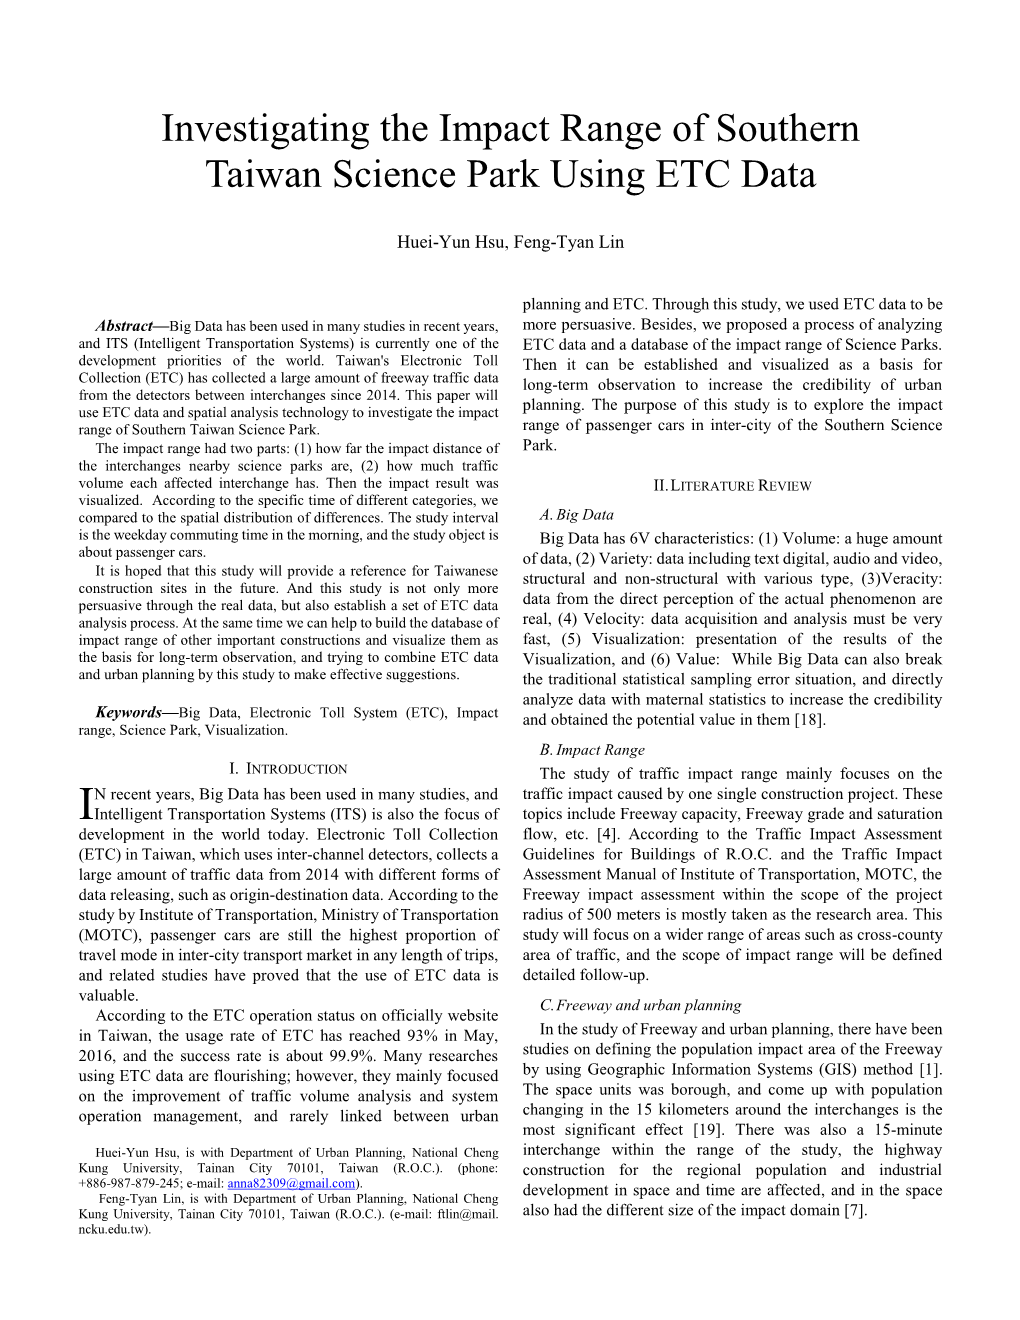 Investigating the Impact Range of Southern Taiwan Science Park Using ETC Data